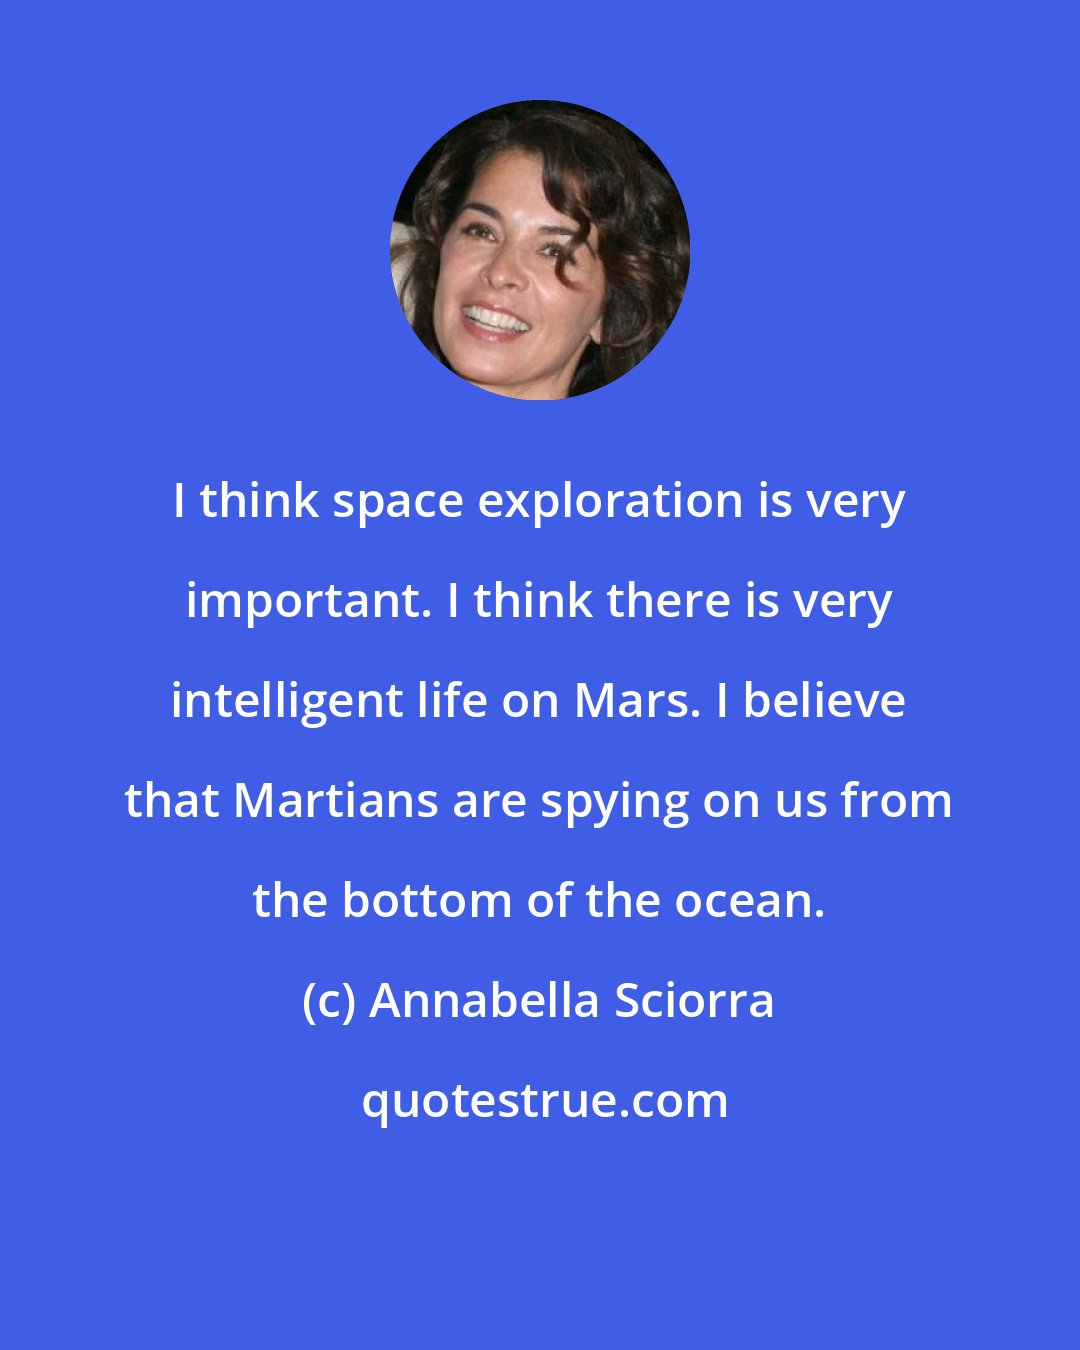 Annabella Sciorra: I think space exploration is very important. I think there is very intelligent life on Mars. I believe that Martians are spying on us from the bottom of the ocean.